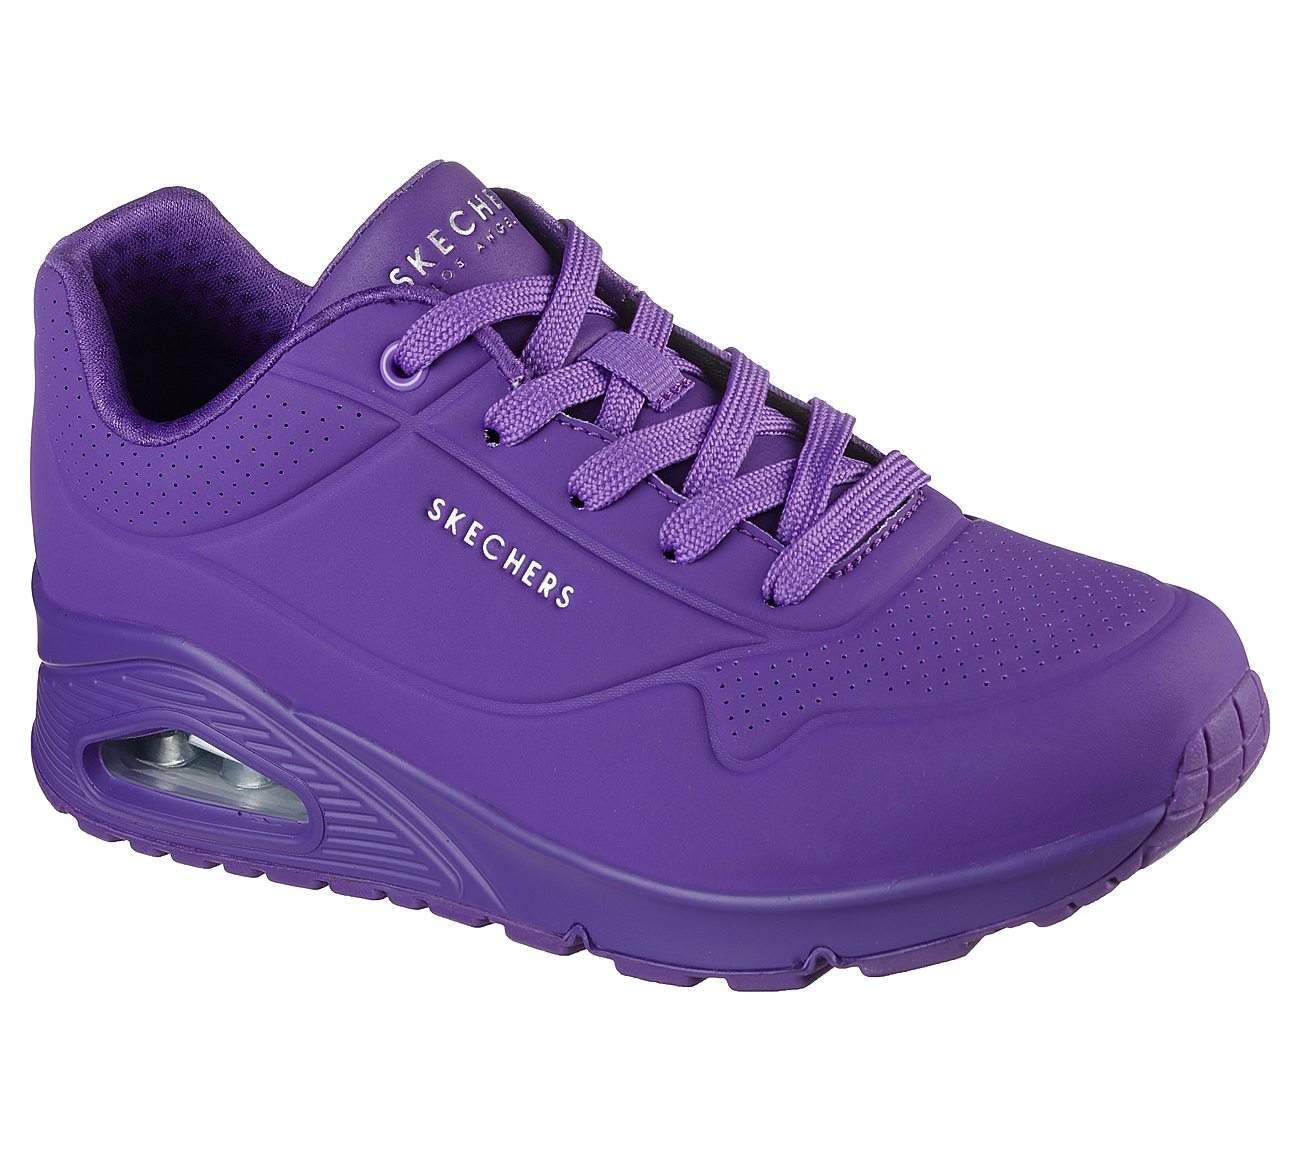 Skechers - Buy Skechers Shoes Online in India | Metro Shoes-saigonsouth.com.vn